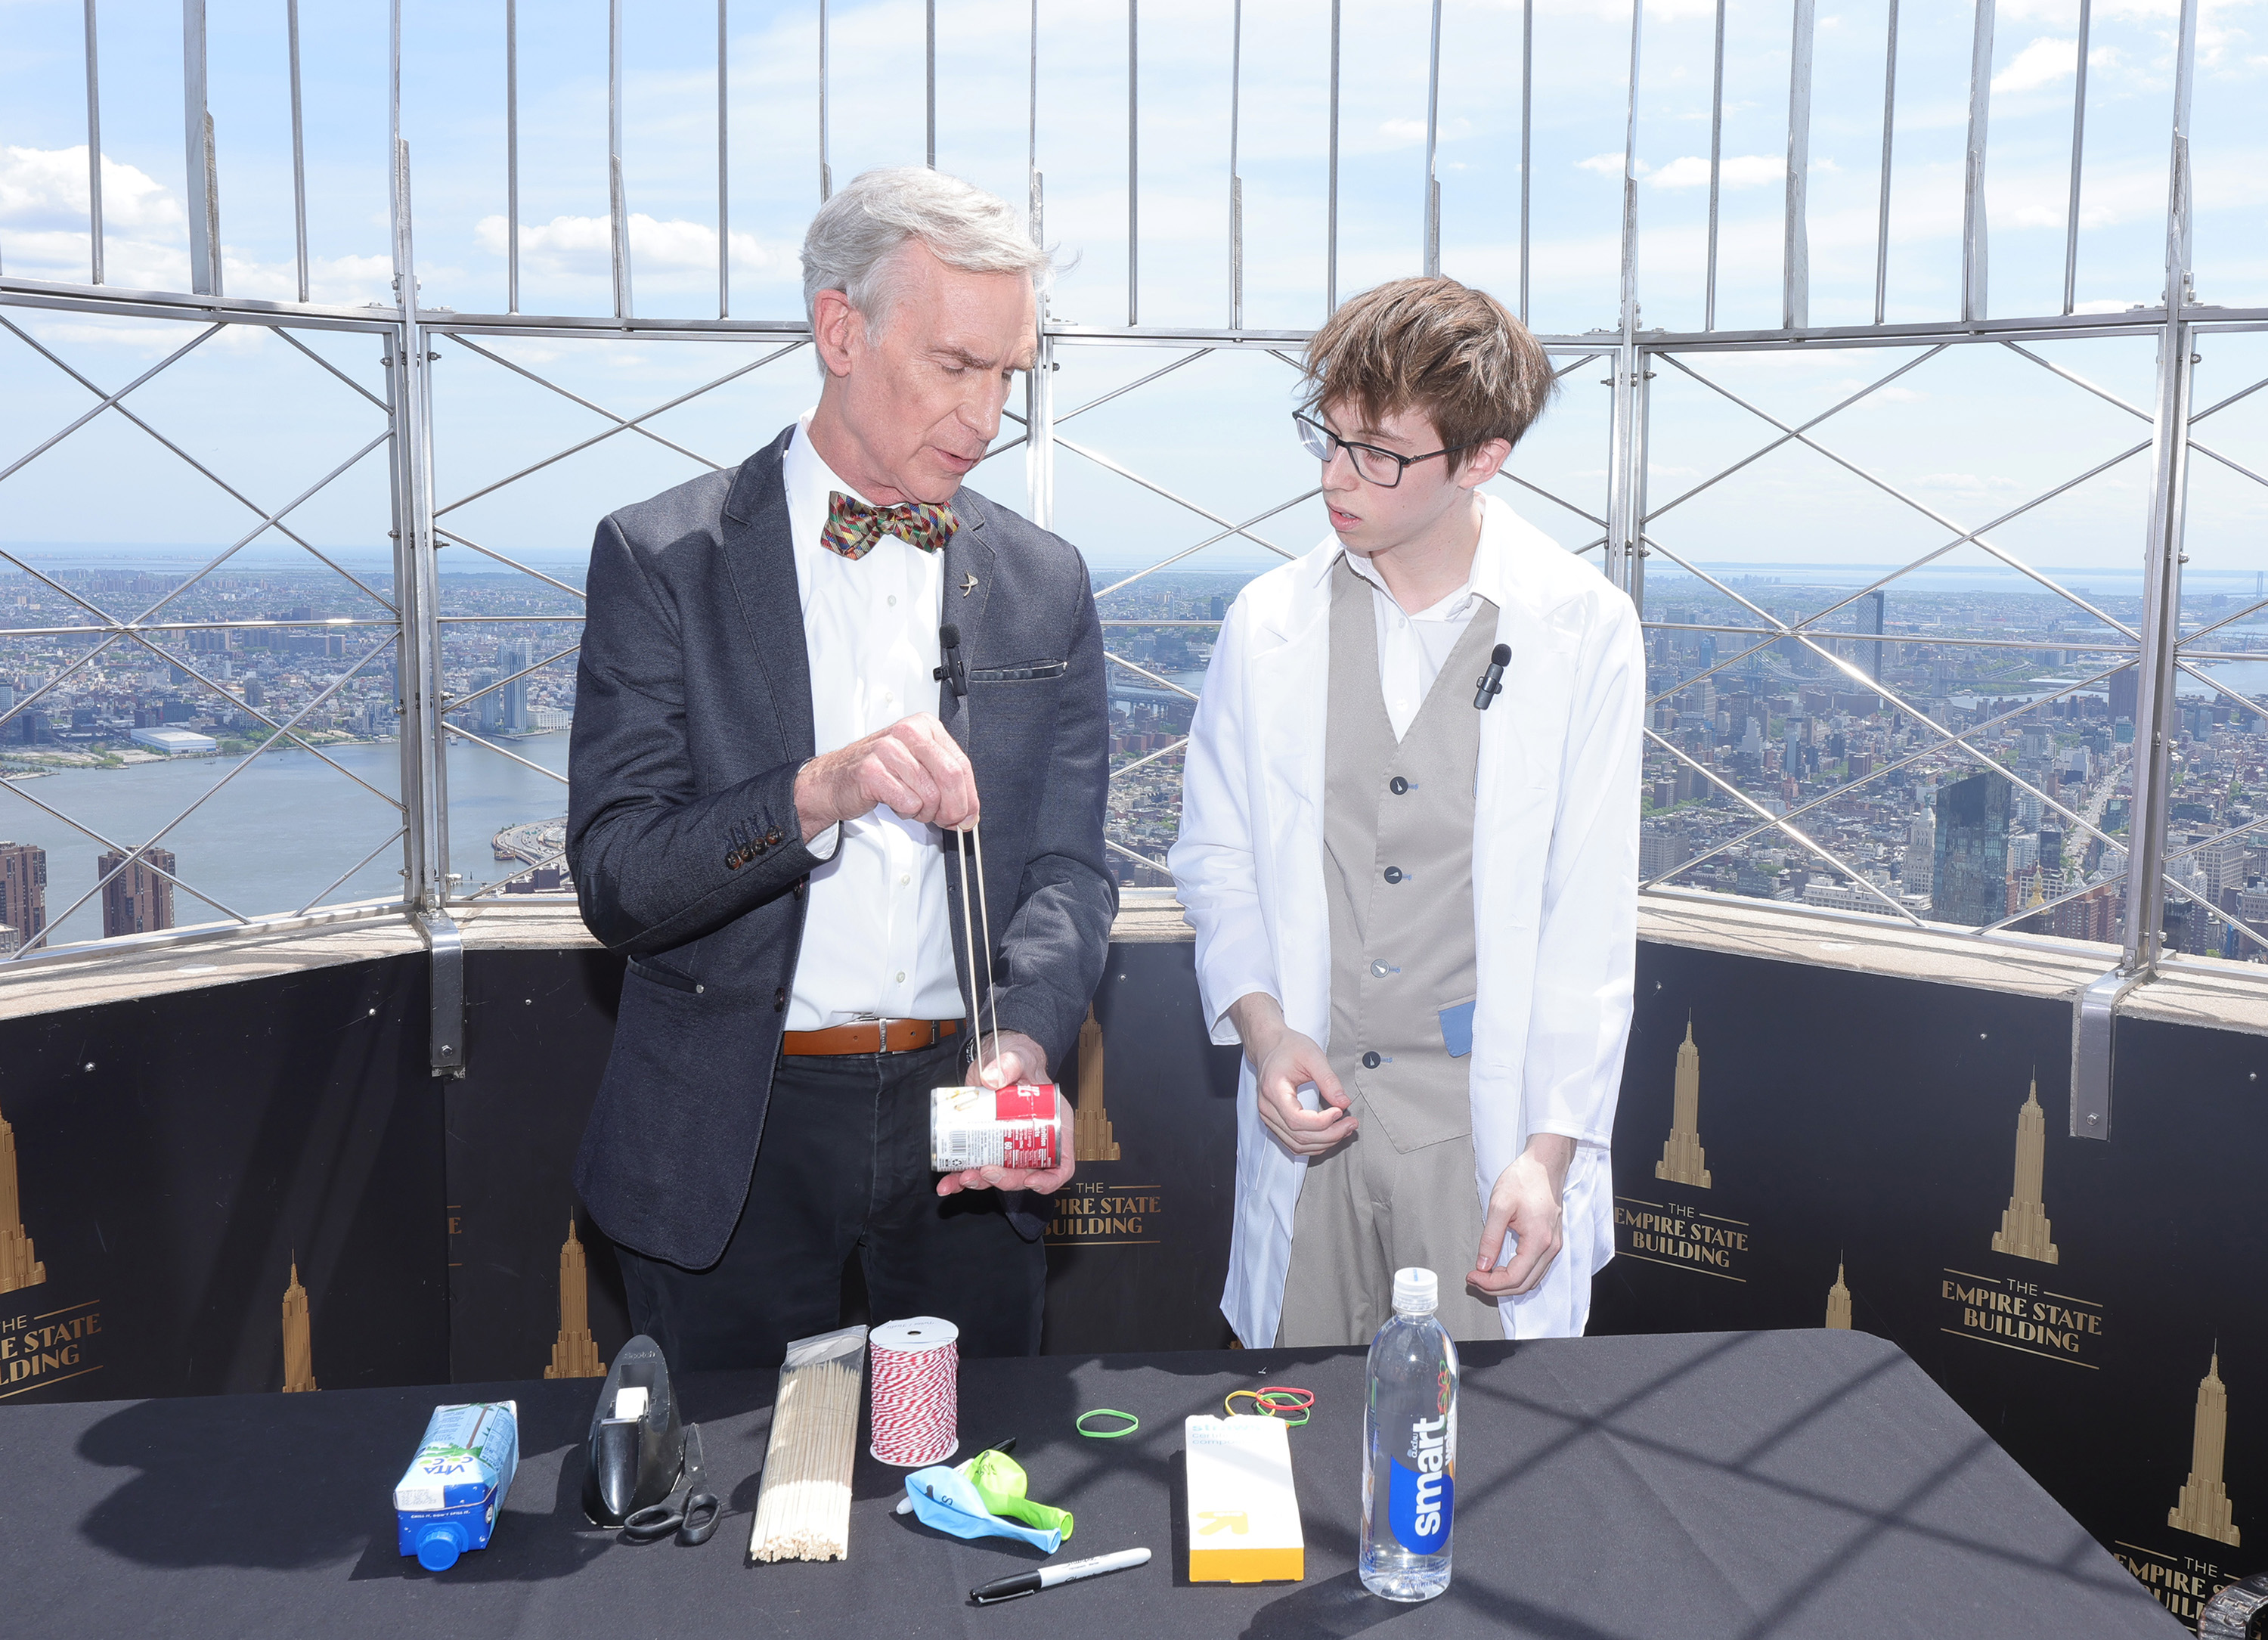 Bill Nye and Thomas Edwards conduct a science experiment at the top of the Empire State Building during a visit on May 8, 2023, in New York City.